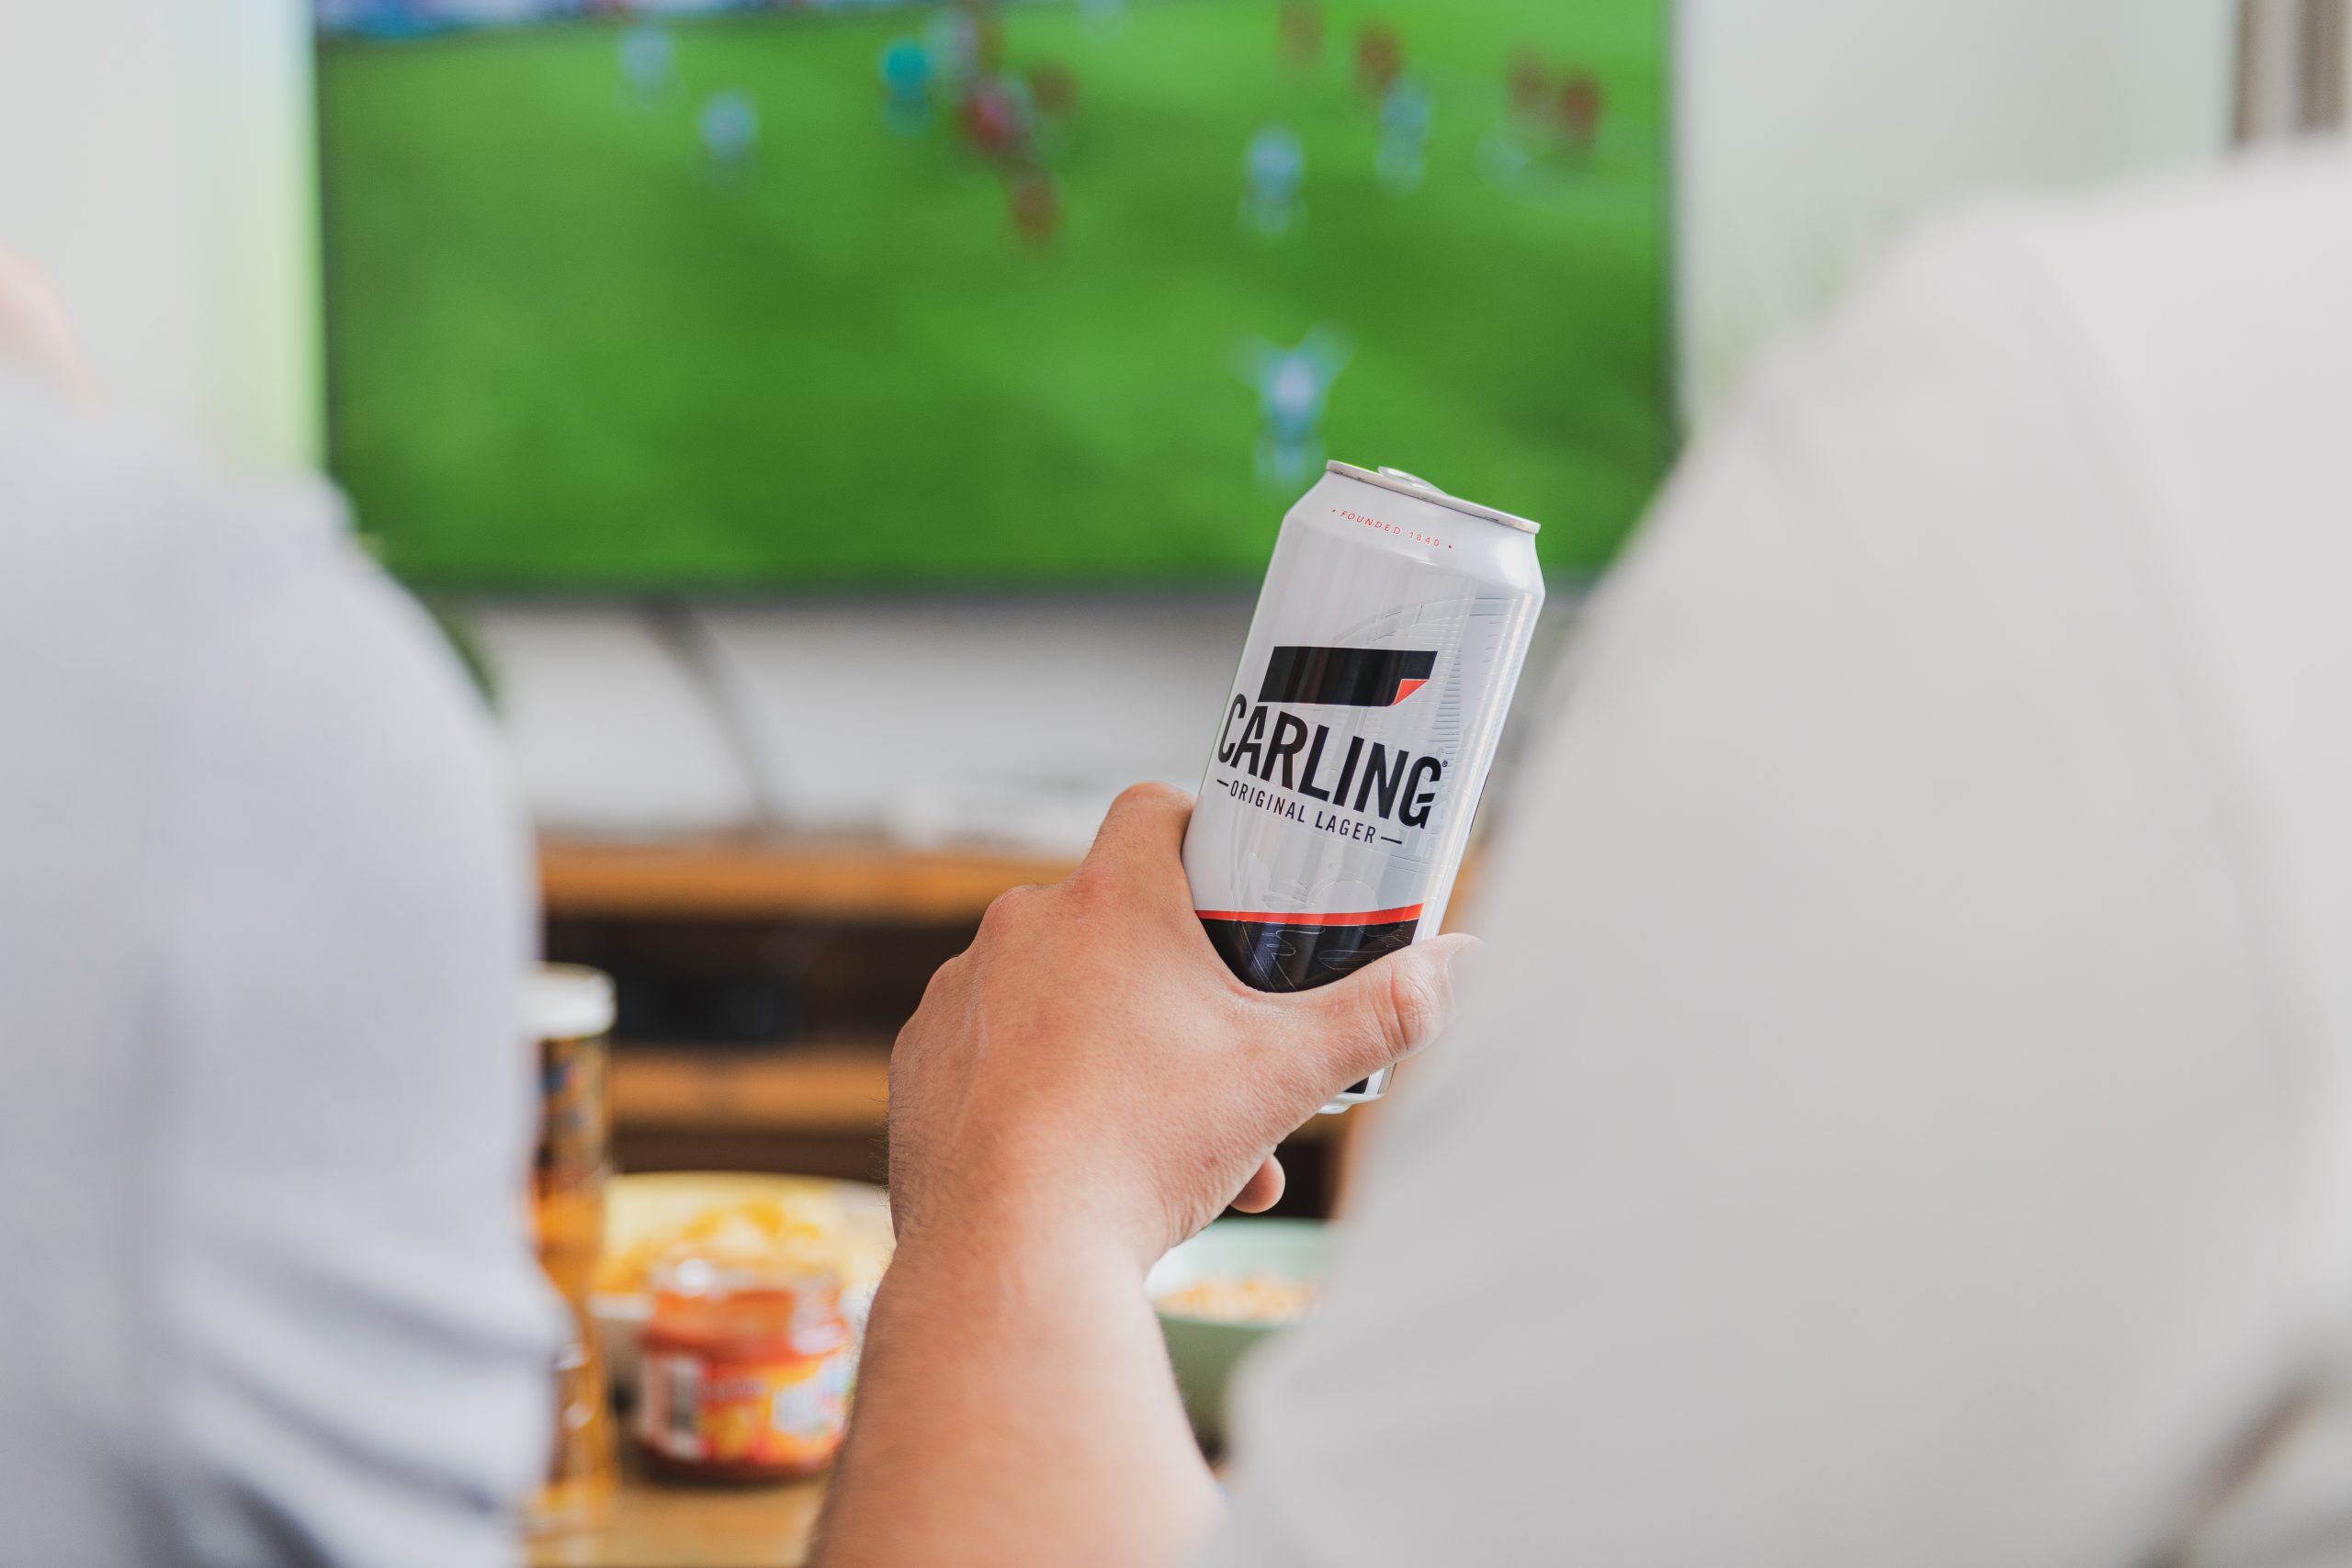 Carling teams up with Talksport for World Cup coverage